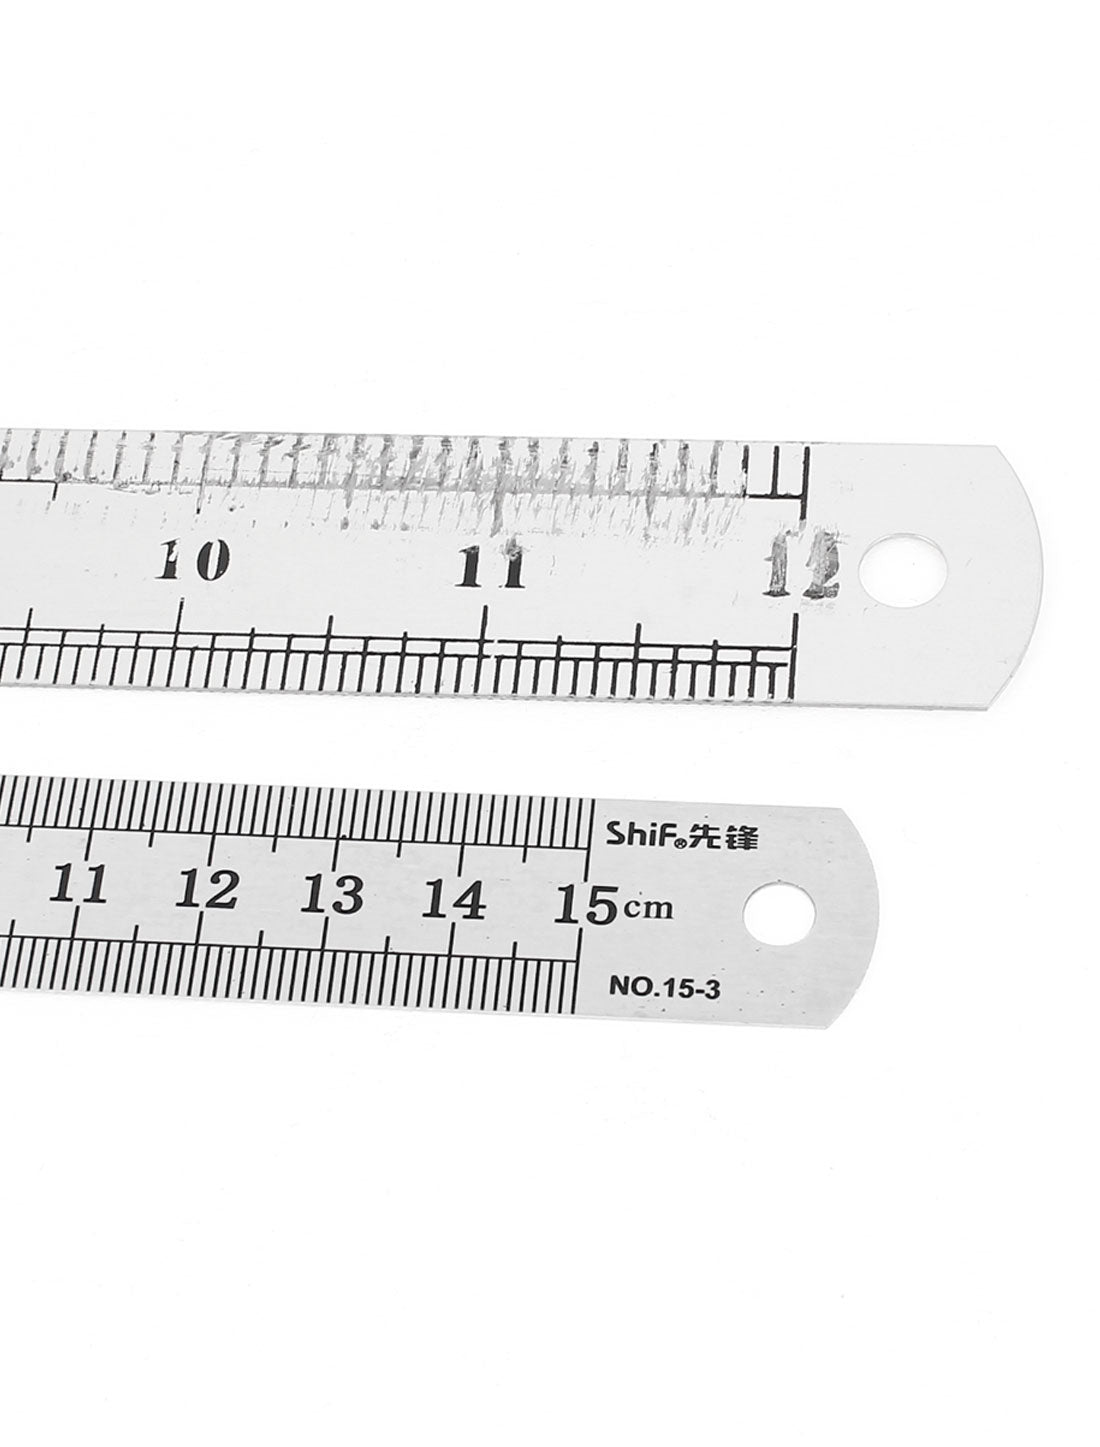 uxcell Uxcell 2 in 1 15cm 30cm Measure Range Double Side   Office Metric Scale Straight Ruler Silver Tone